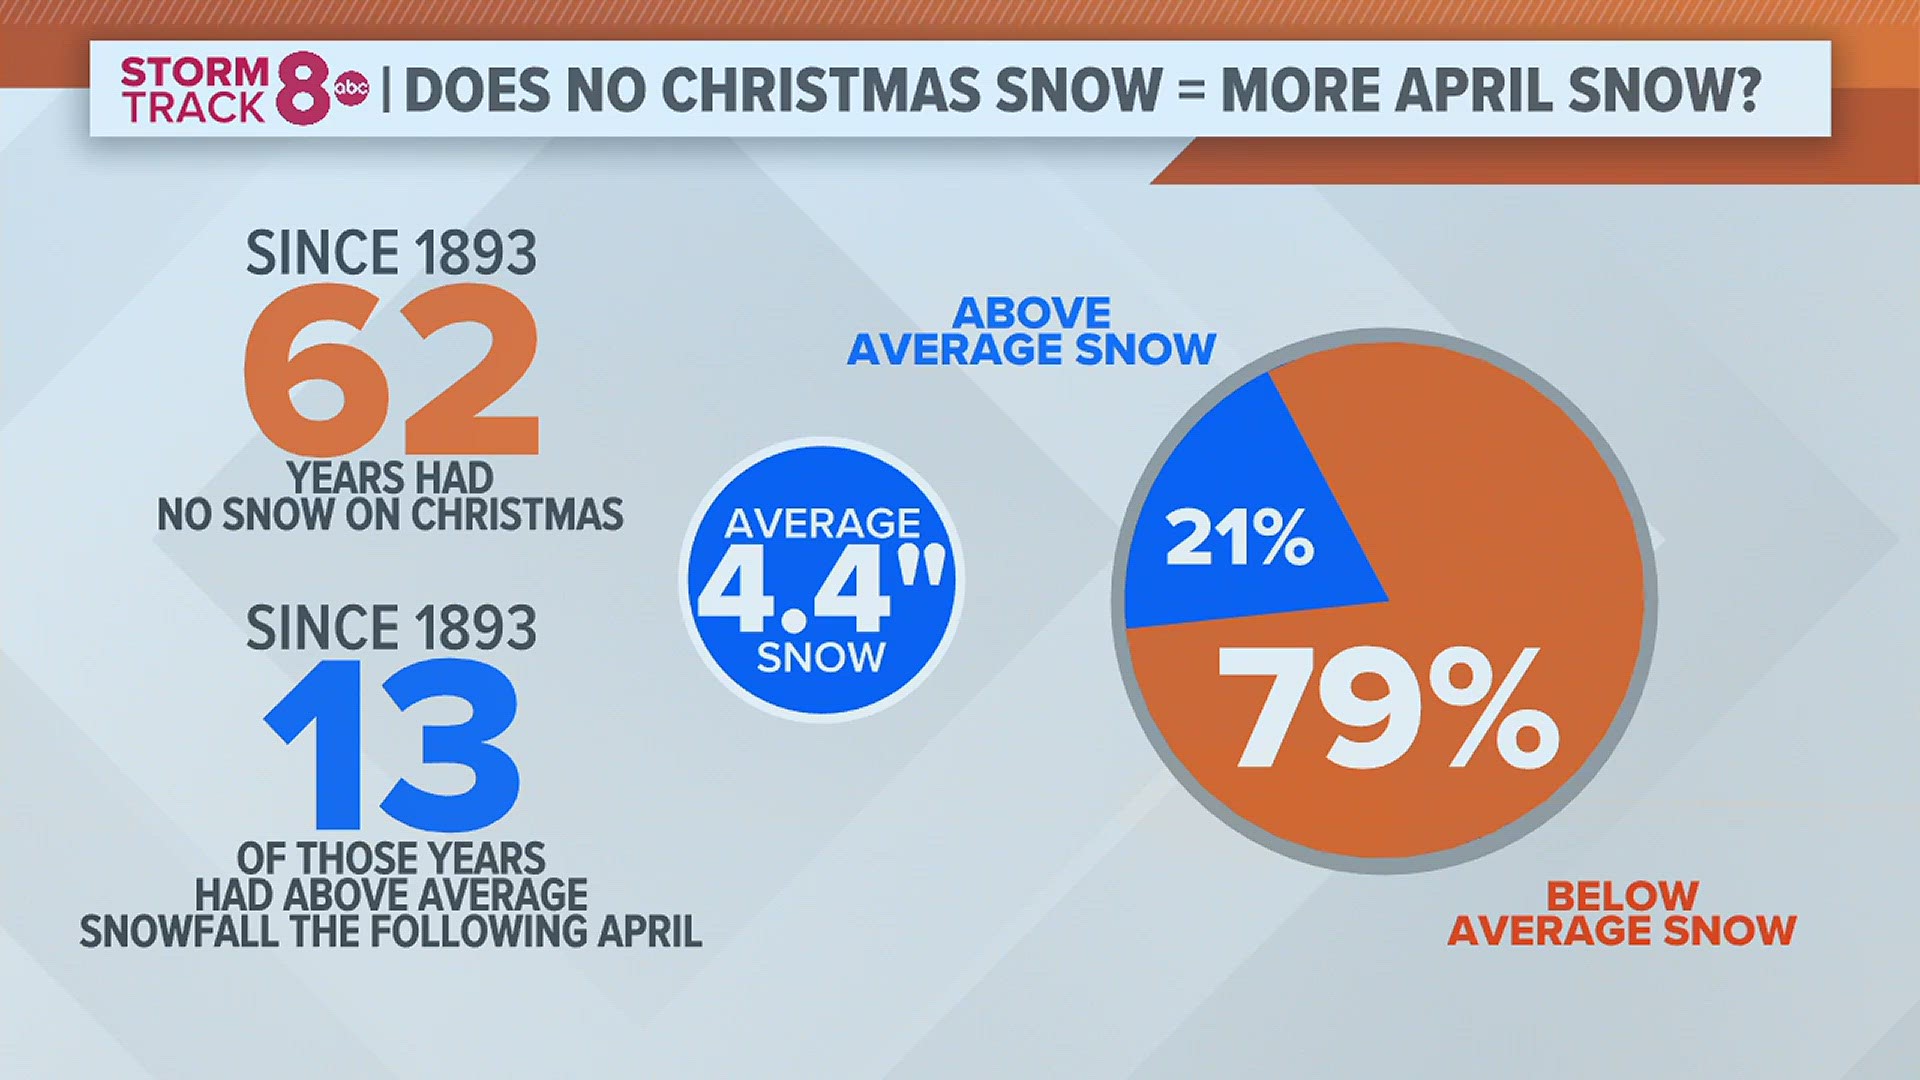 Mary from Davenport asks if our snow-free Christmas means we'll pay for it eventually with more snow in April.